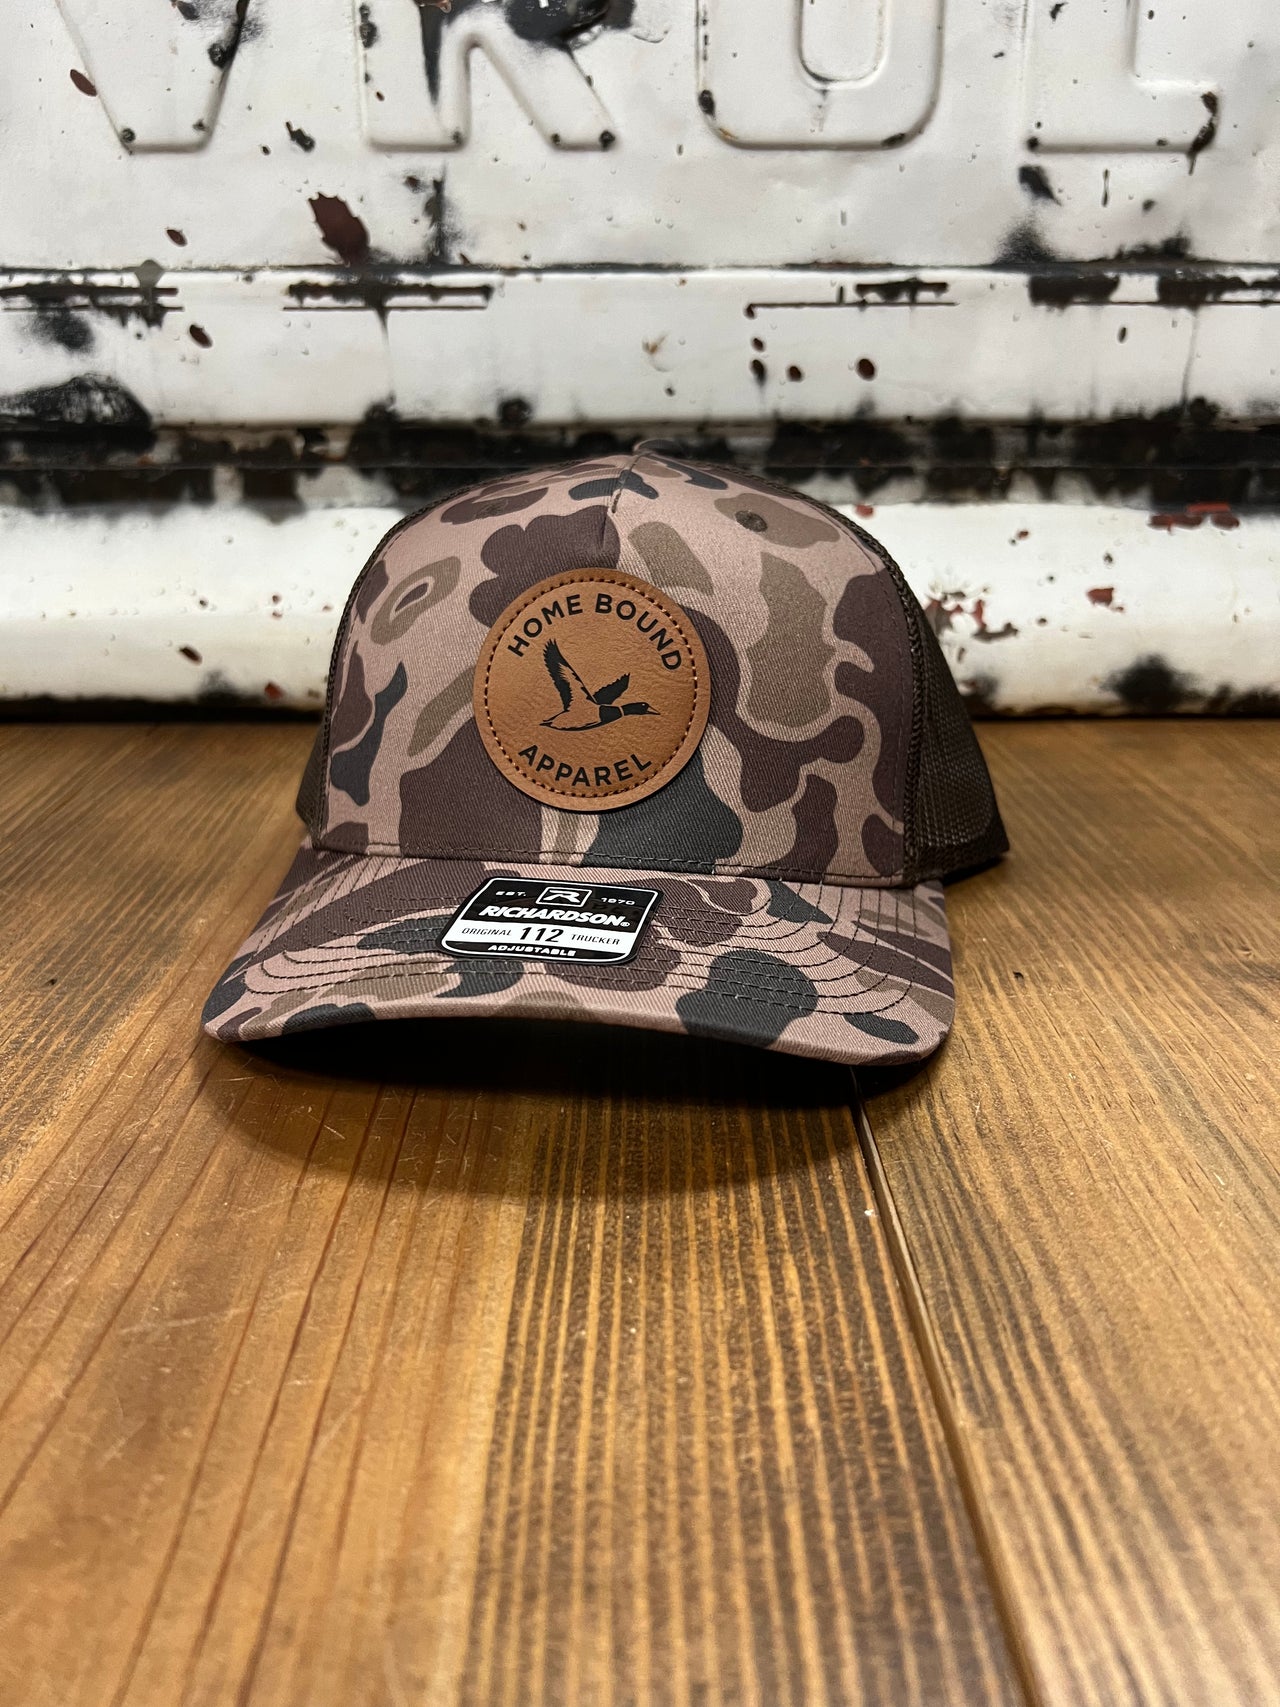 Home Bound Flying Duck Leather Patch Trucker Cap - Bark Duck Camo